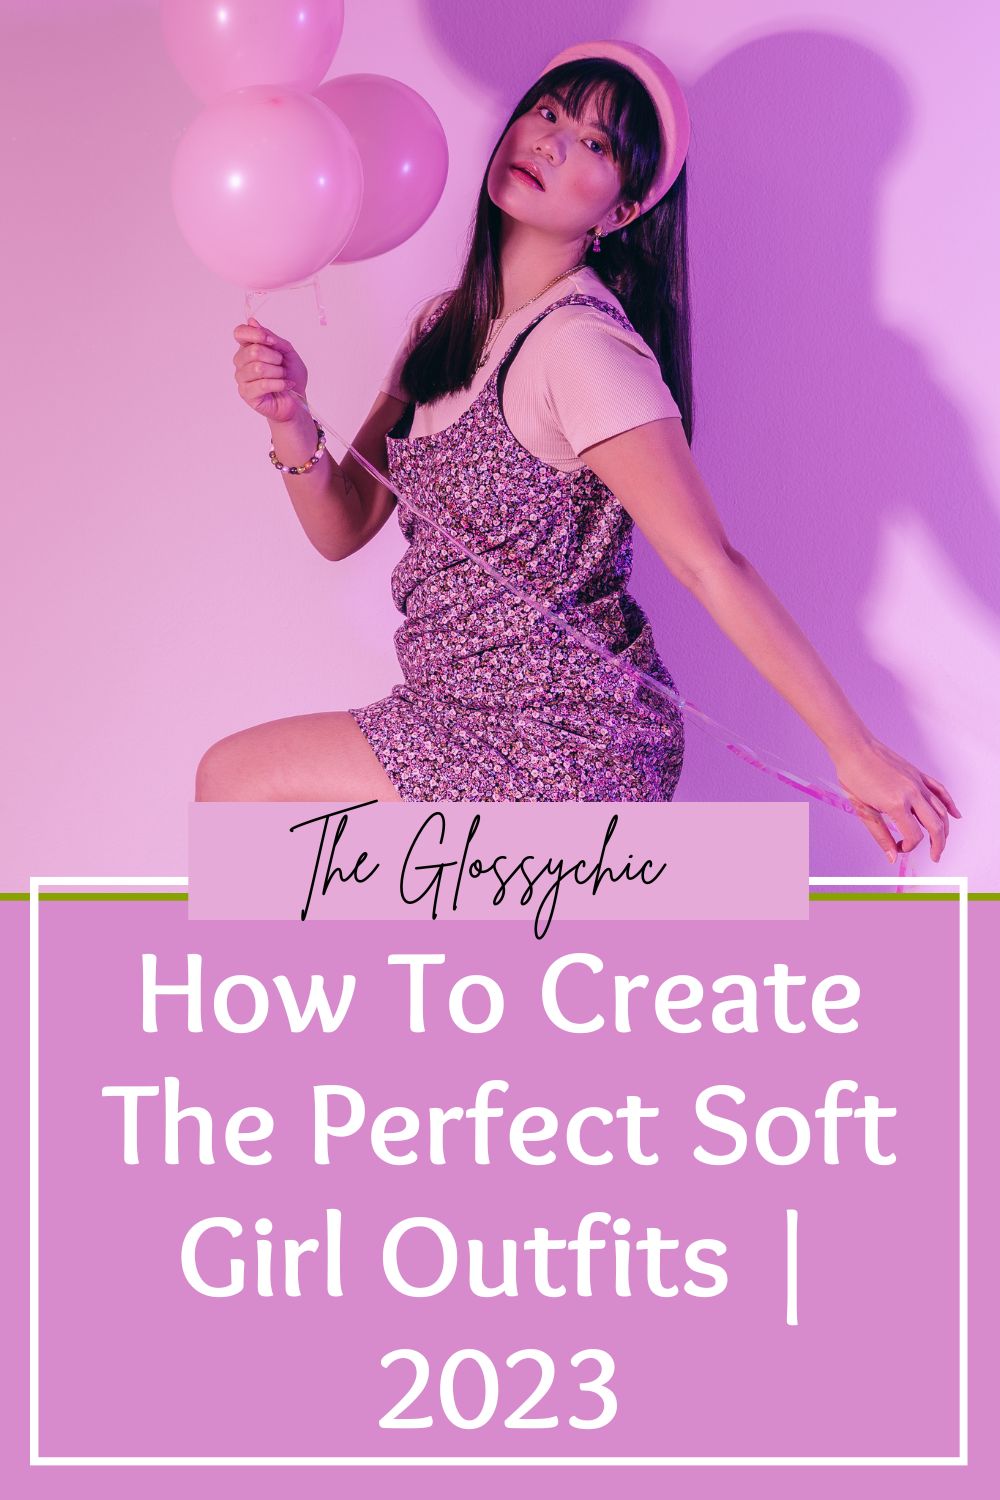 How To Create The Perfect Soft Girl Outfits | 2023